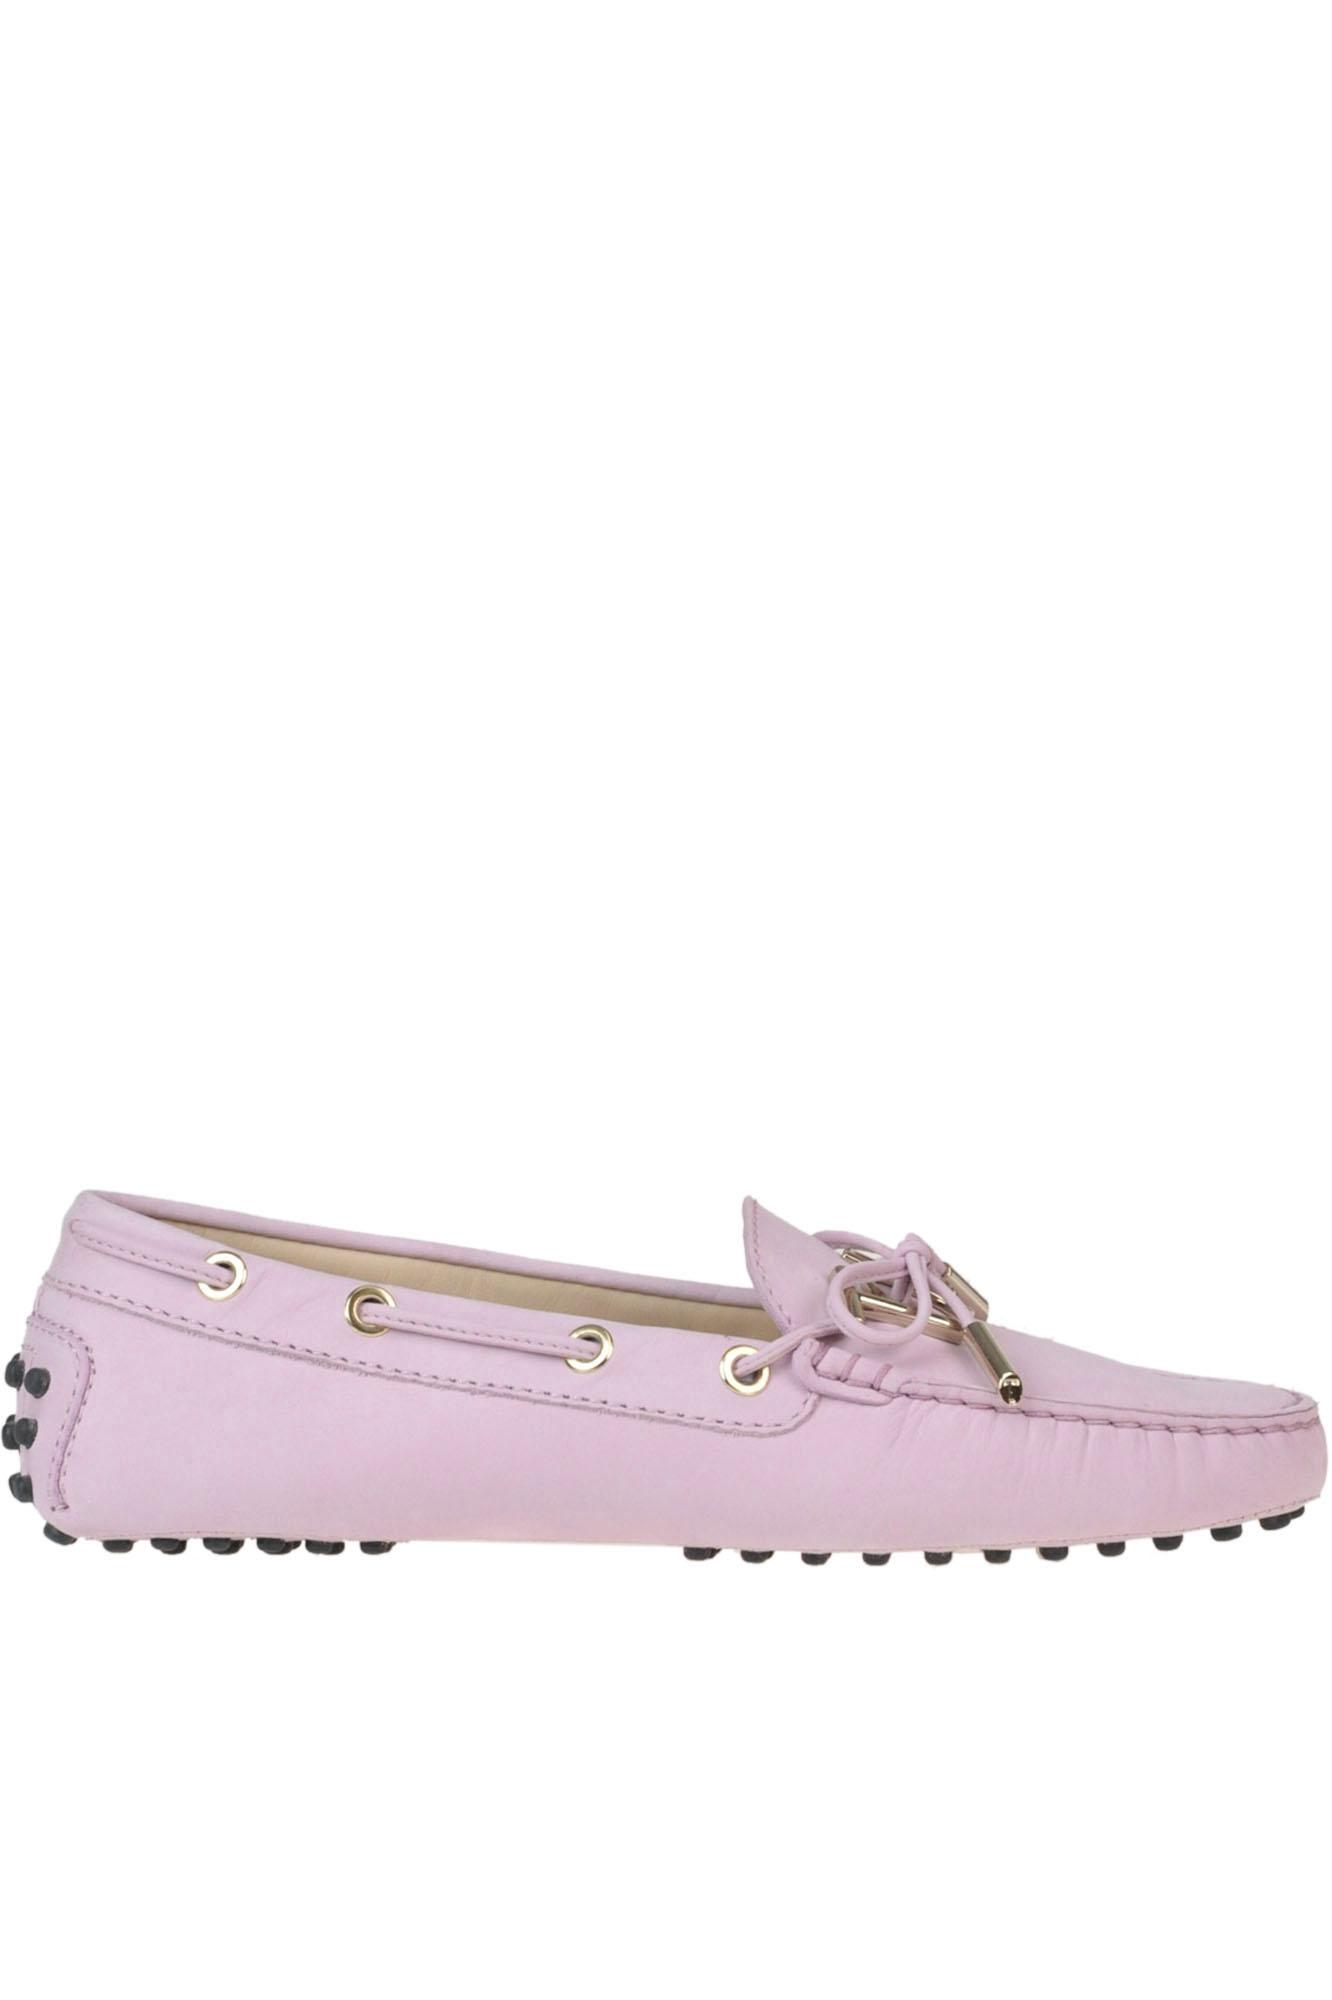 Tod's 'heaven' Suede Loafers in Pink - Lyst